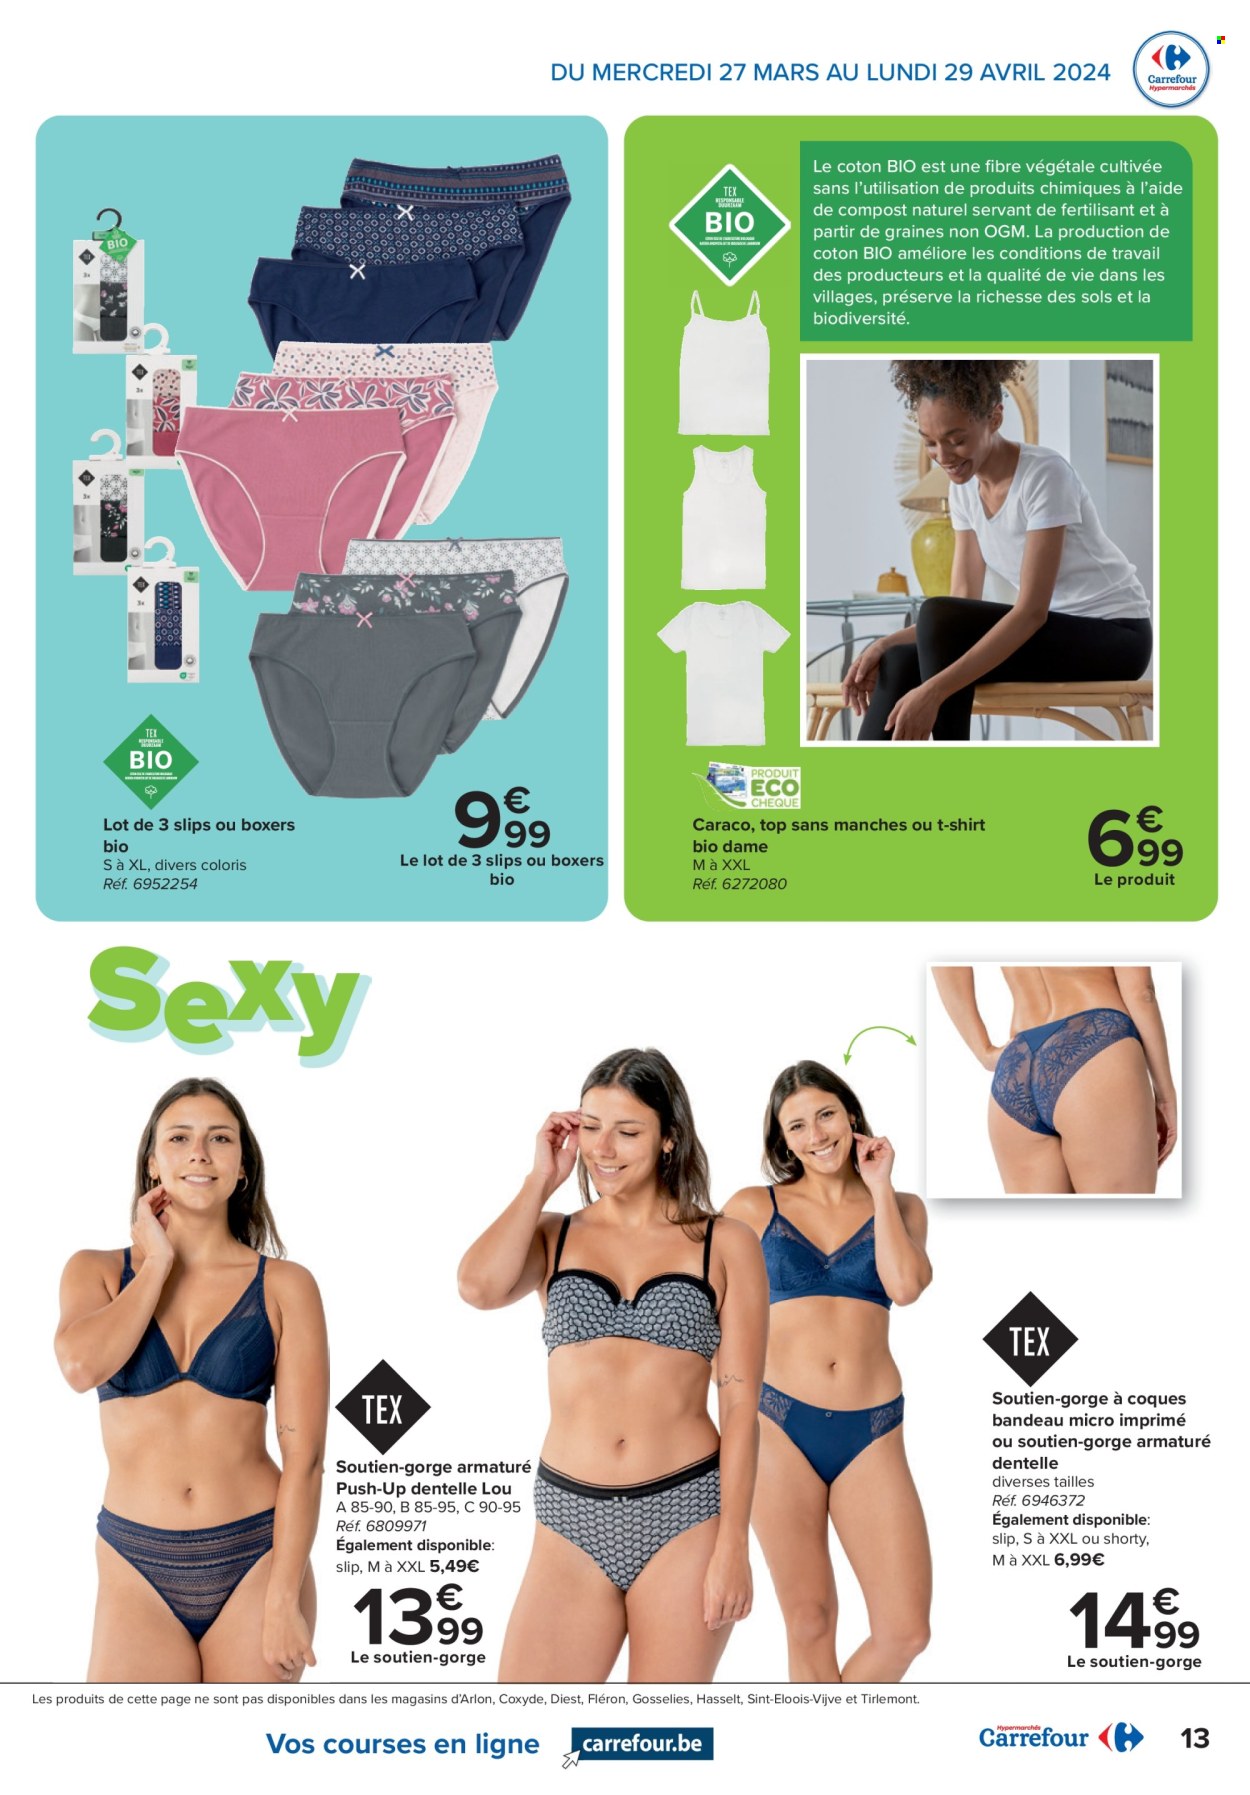 Catalogue Carrefour hypermarkt - 27.3.2024 - 29.4.2024. Page 13.